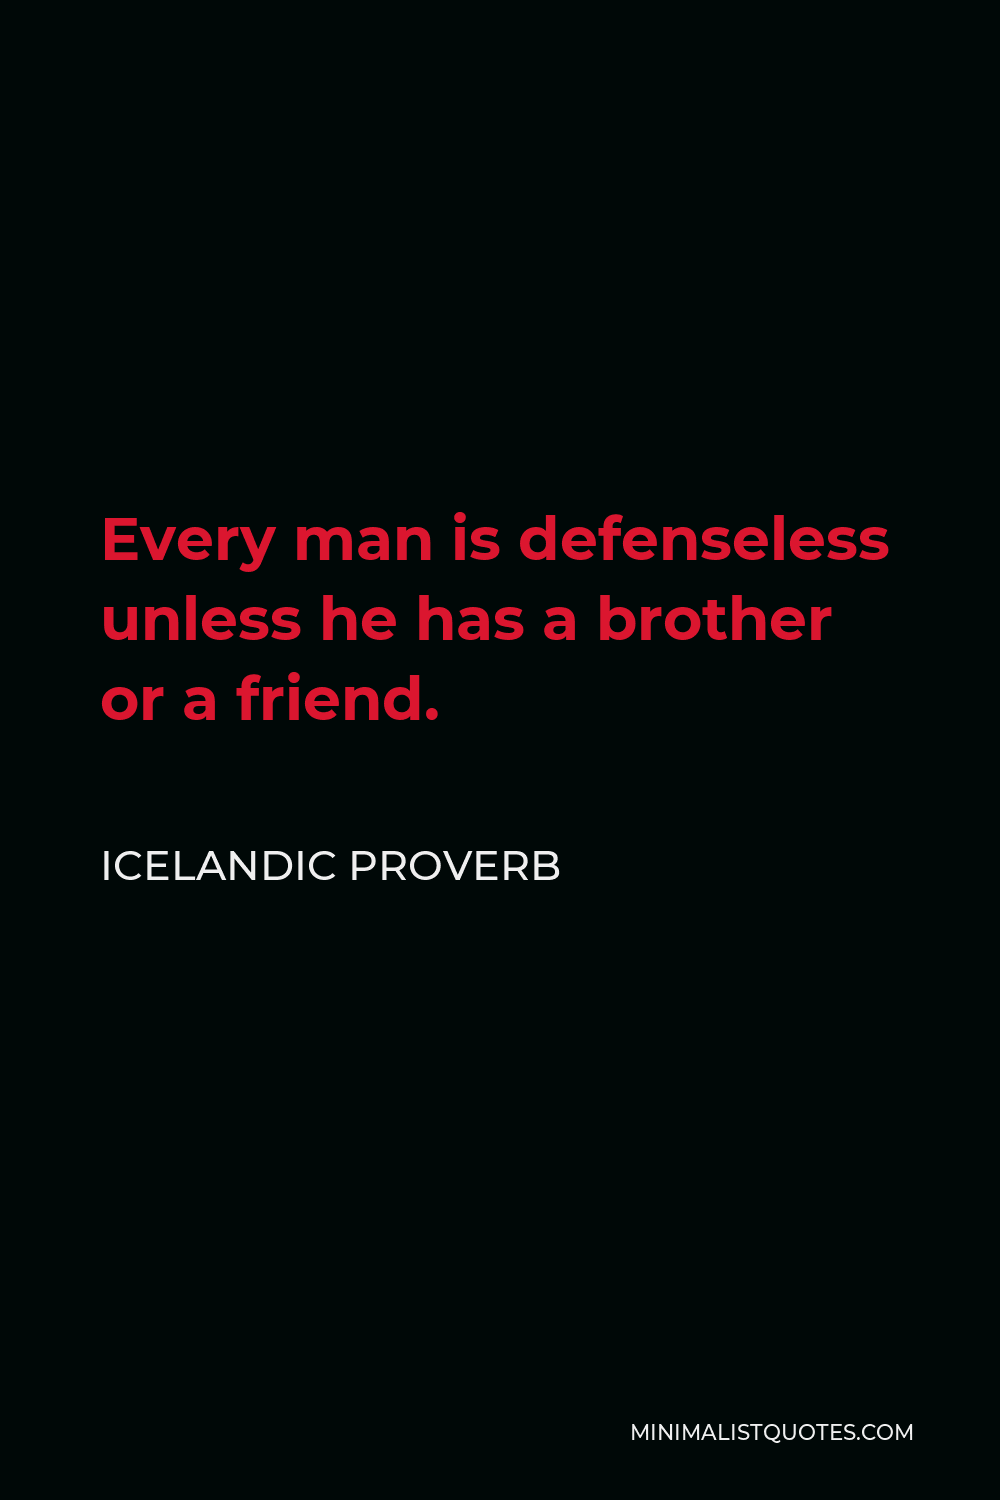 Icelandic Proverb Quote - Every man is defenseless unless he has a brother or a friend.